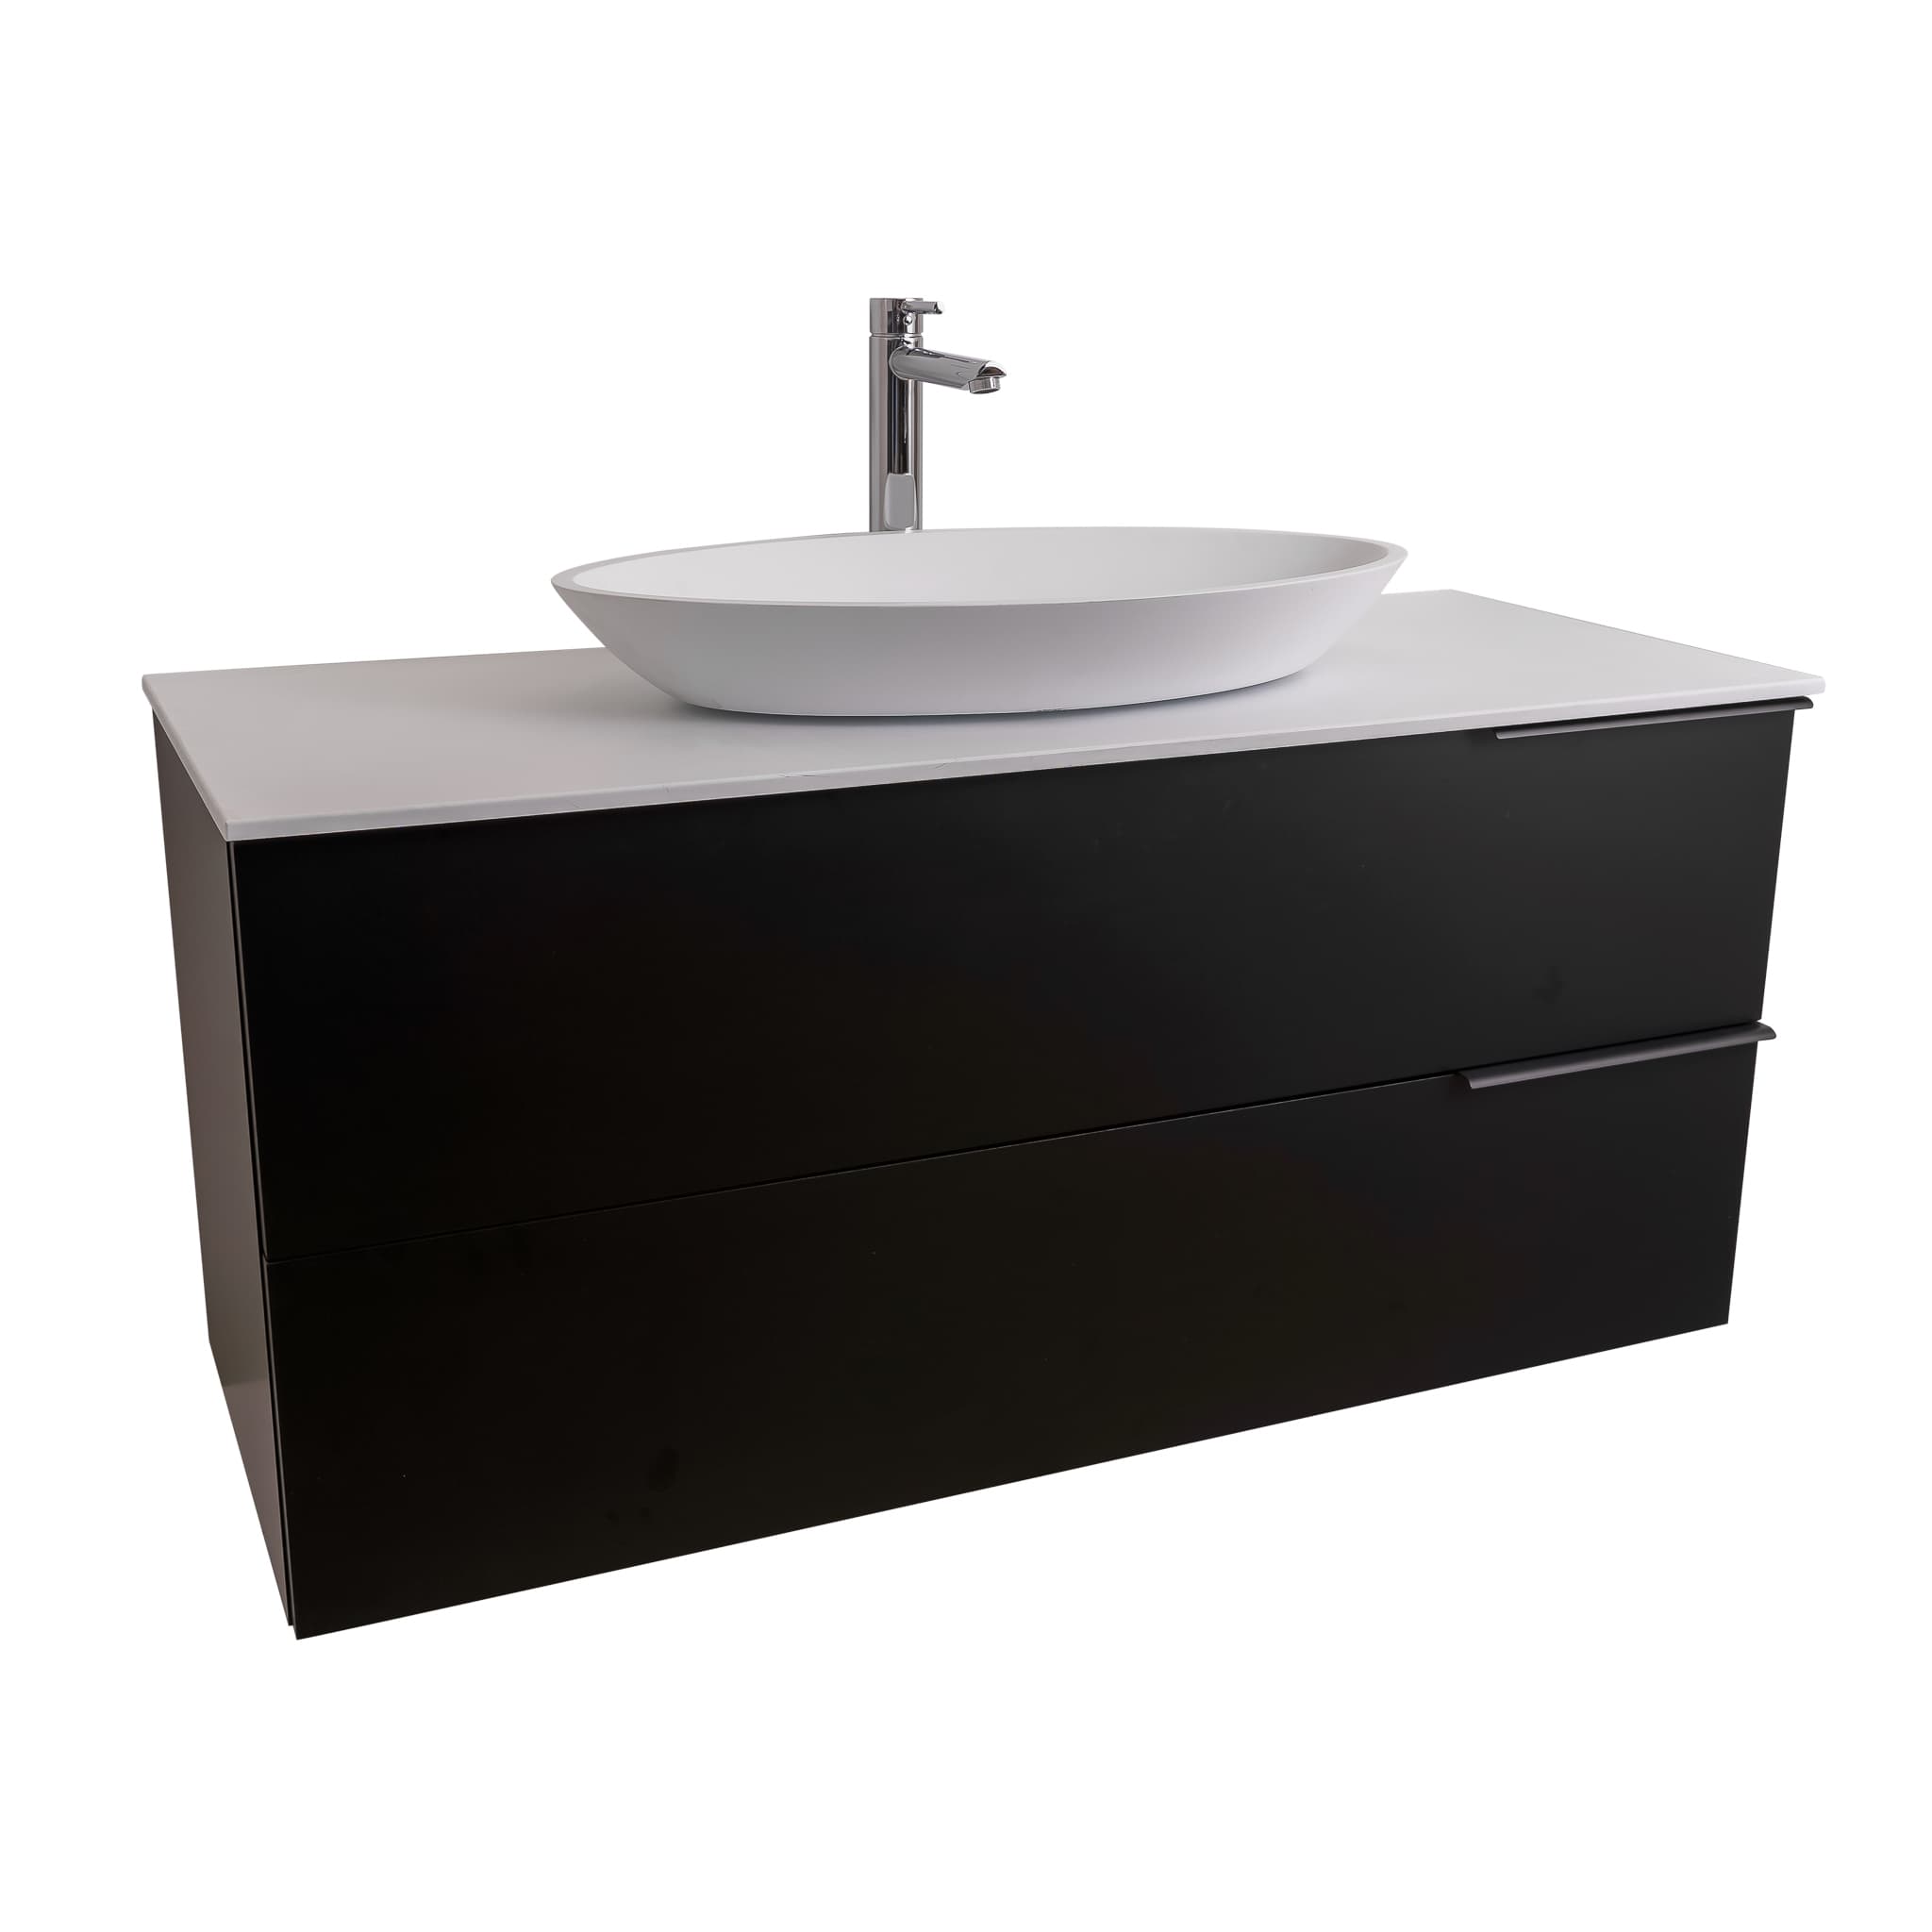 Mallorca 47.5 Matte Black Cabinet, Solid Surface Flat White Counter And Oval Solid Surface White Basin 1305, Wall Mounted Modern Vanity Set